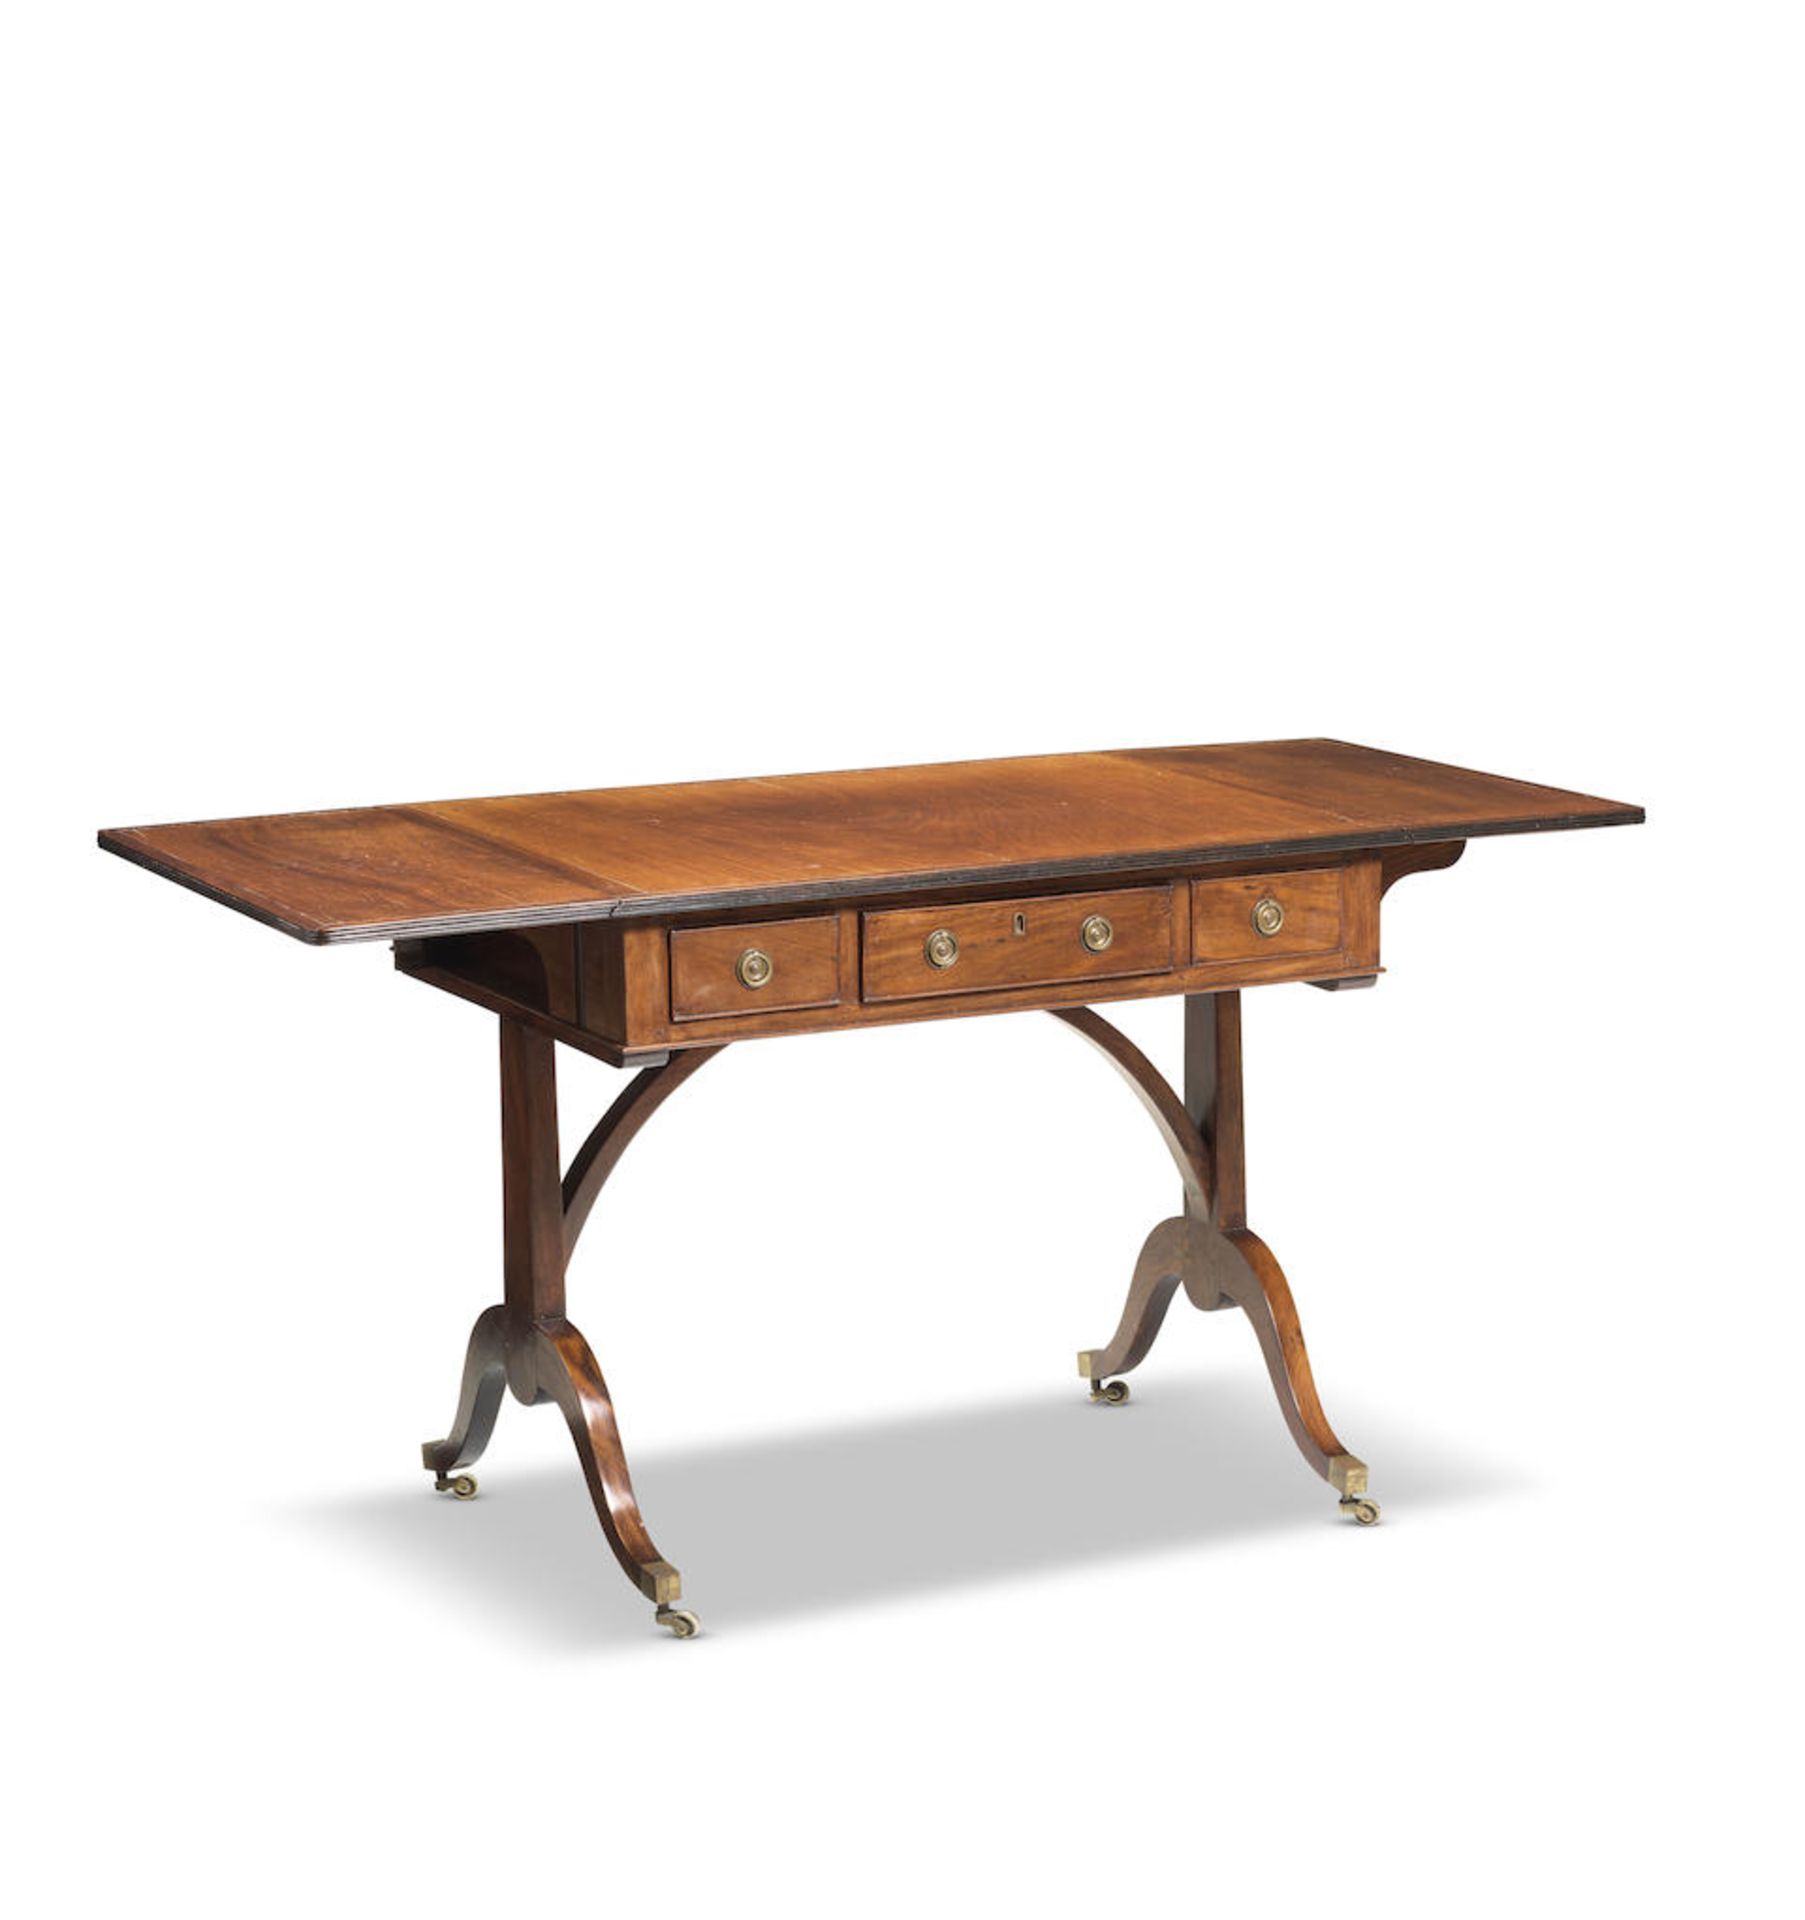 A British Colonial first half 19th century padouk and rosewood sofa table of small proportions 1... - Image 2 of 2